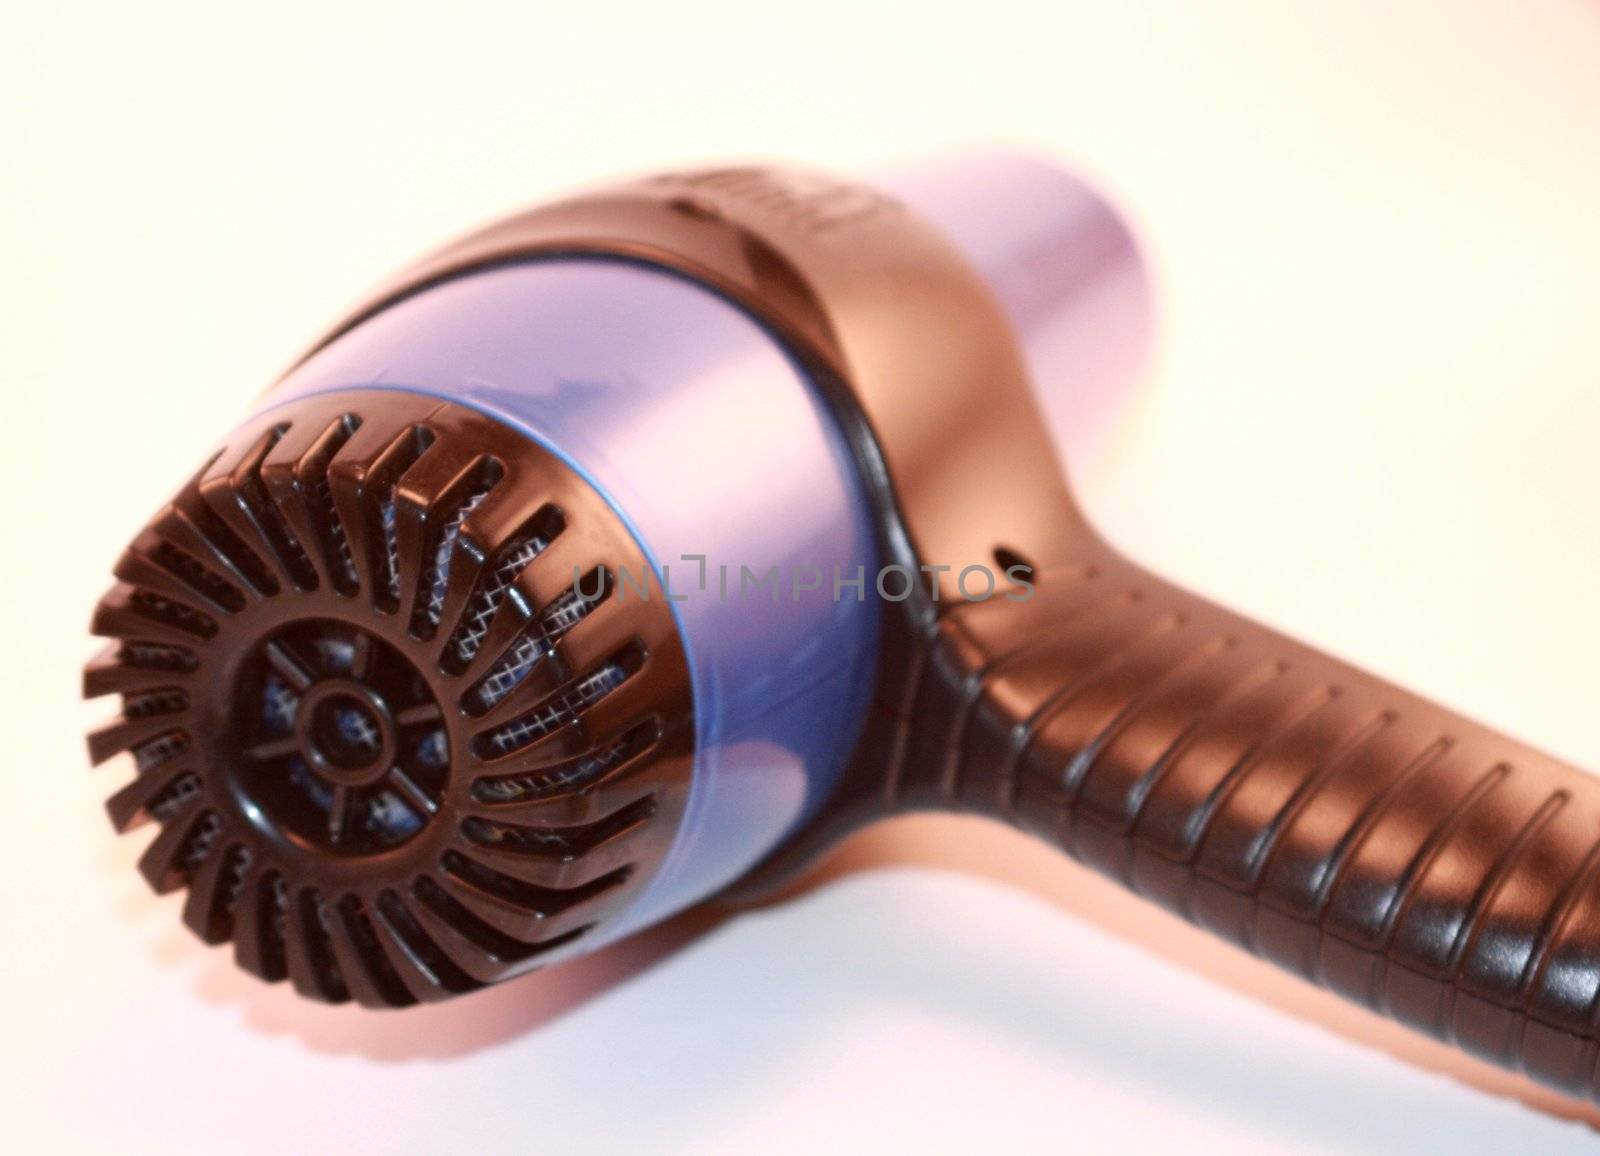 Blue and black electric hairdryer for hairstyling and beauty isolated on white background. Hair appliance for fashion and beauty.